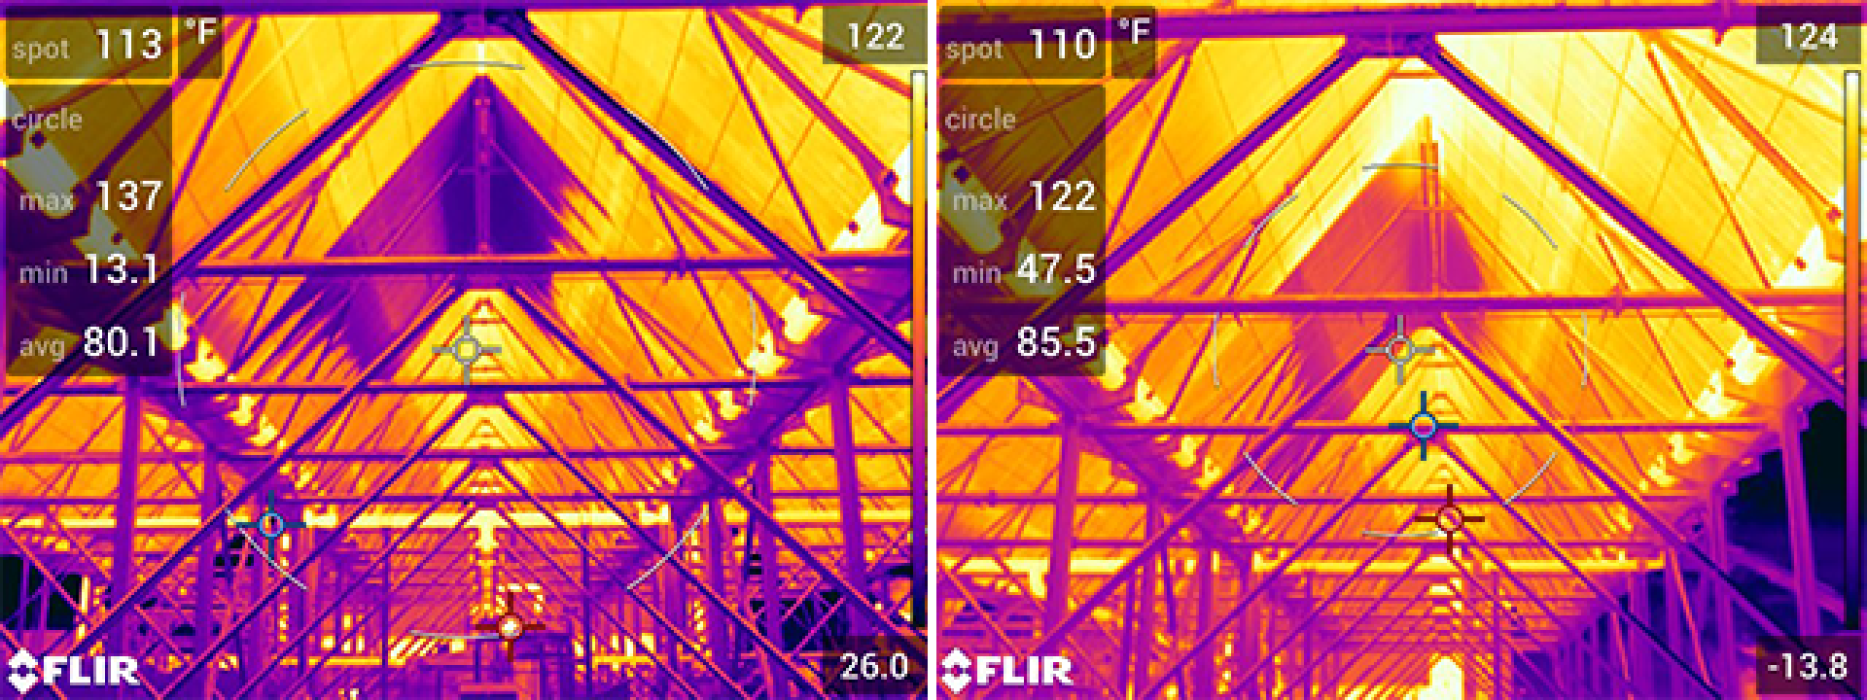 Infrared images of pipes in a power plant.